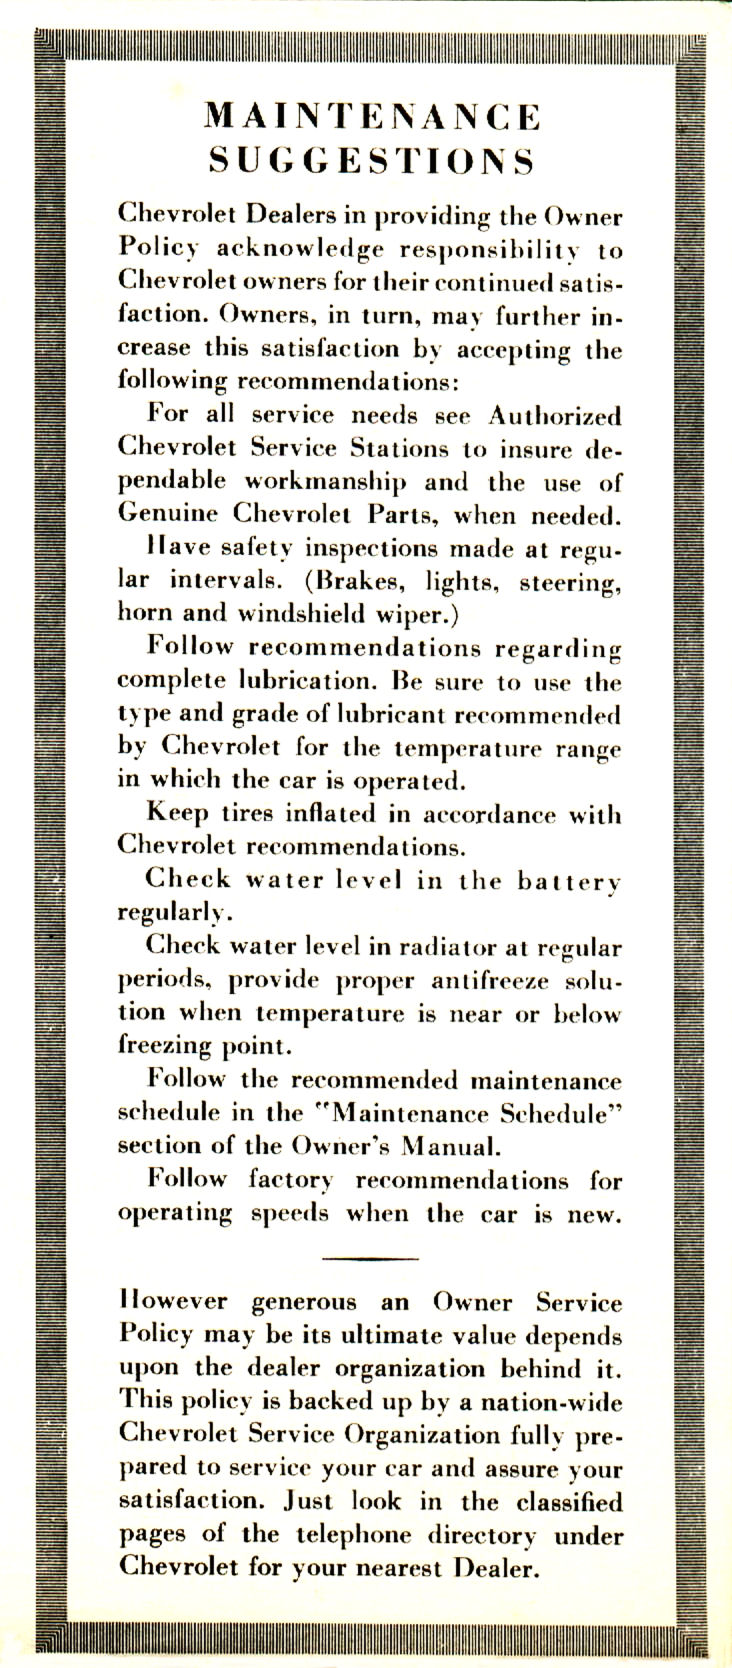 1955_Chevrolet_Service_Policy-02